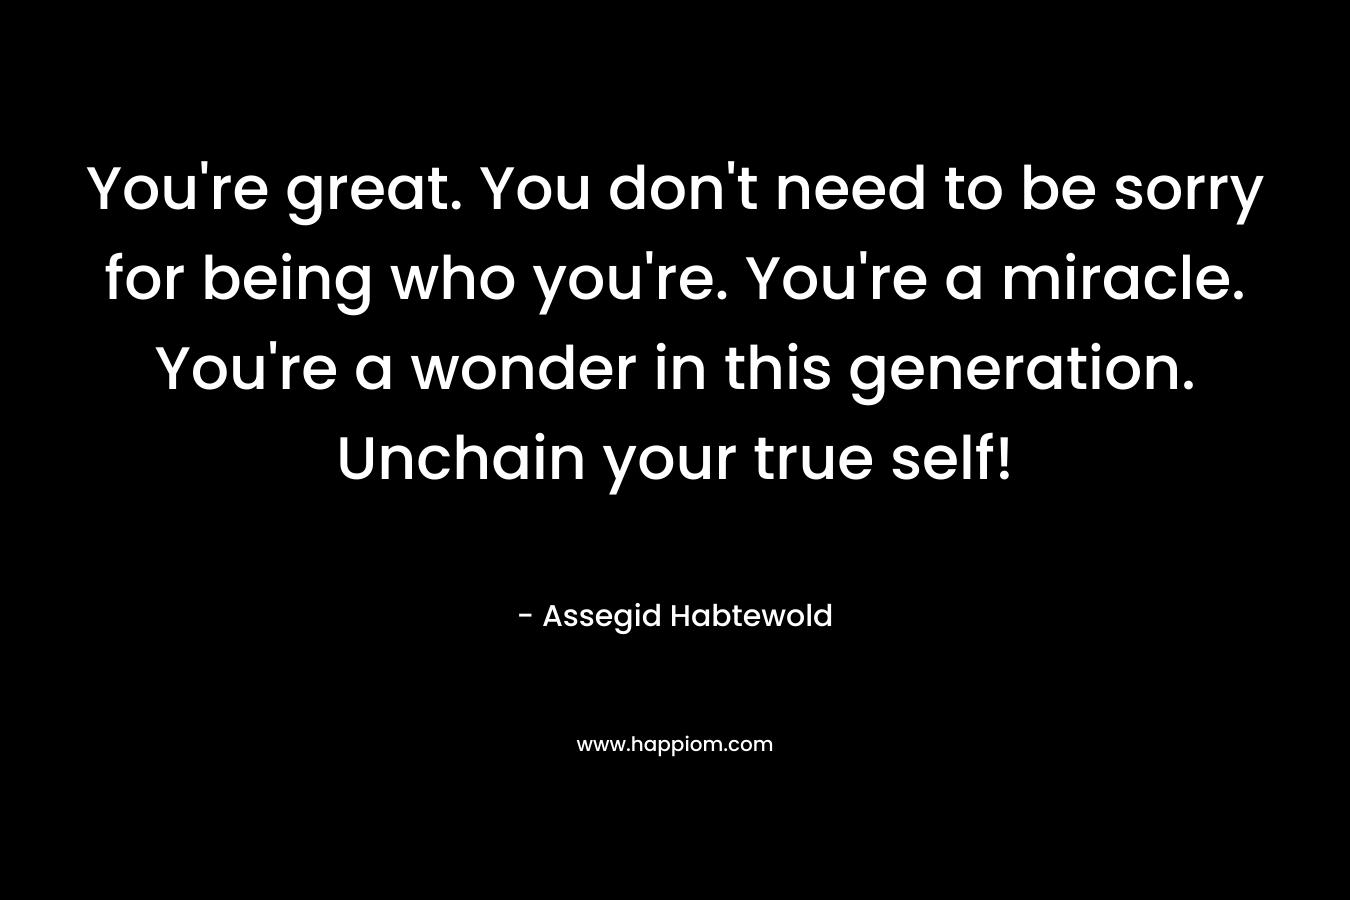 You’re great. You don’t need to be sorry for being who you’re. You’re a miracle. You’re a wonder in this generation. Unchain your true self! – Assegid Habtewold